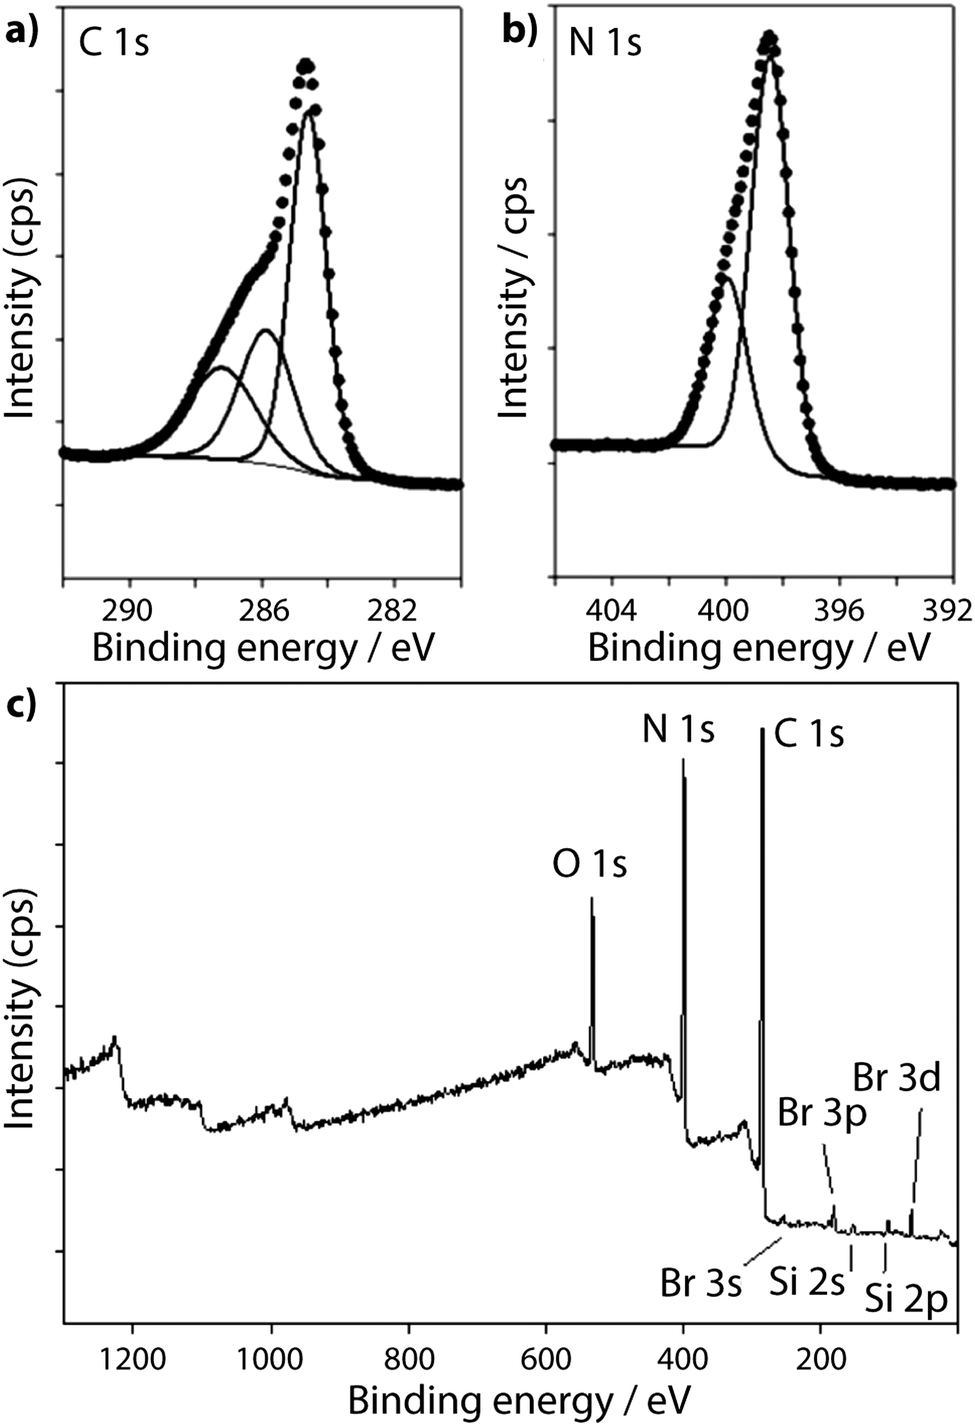 Carbon Nitrides Synthesis And Characterization Of A New Class Of Functional Materials Physical Chemistry Chemical Physics Rsc Publishing Doi 10 1039 C7cpg